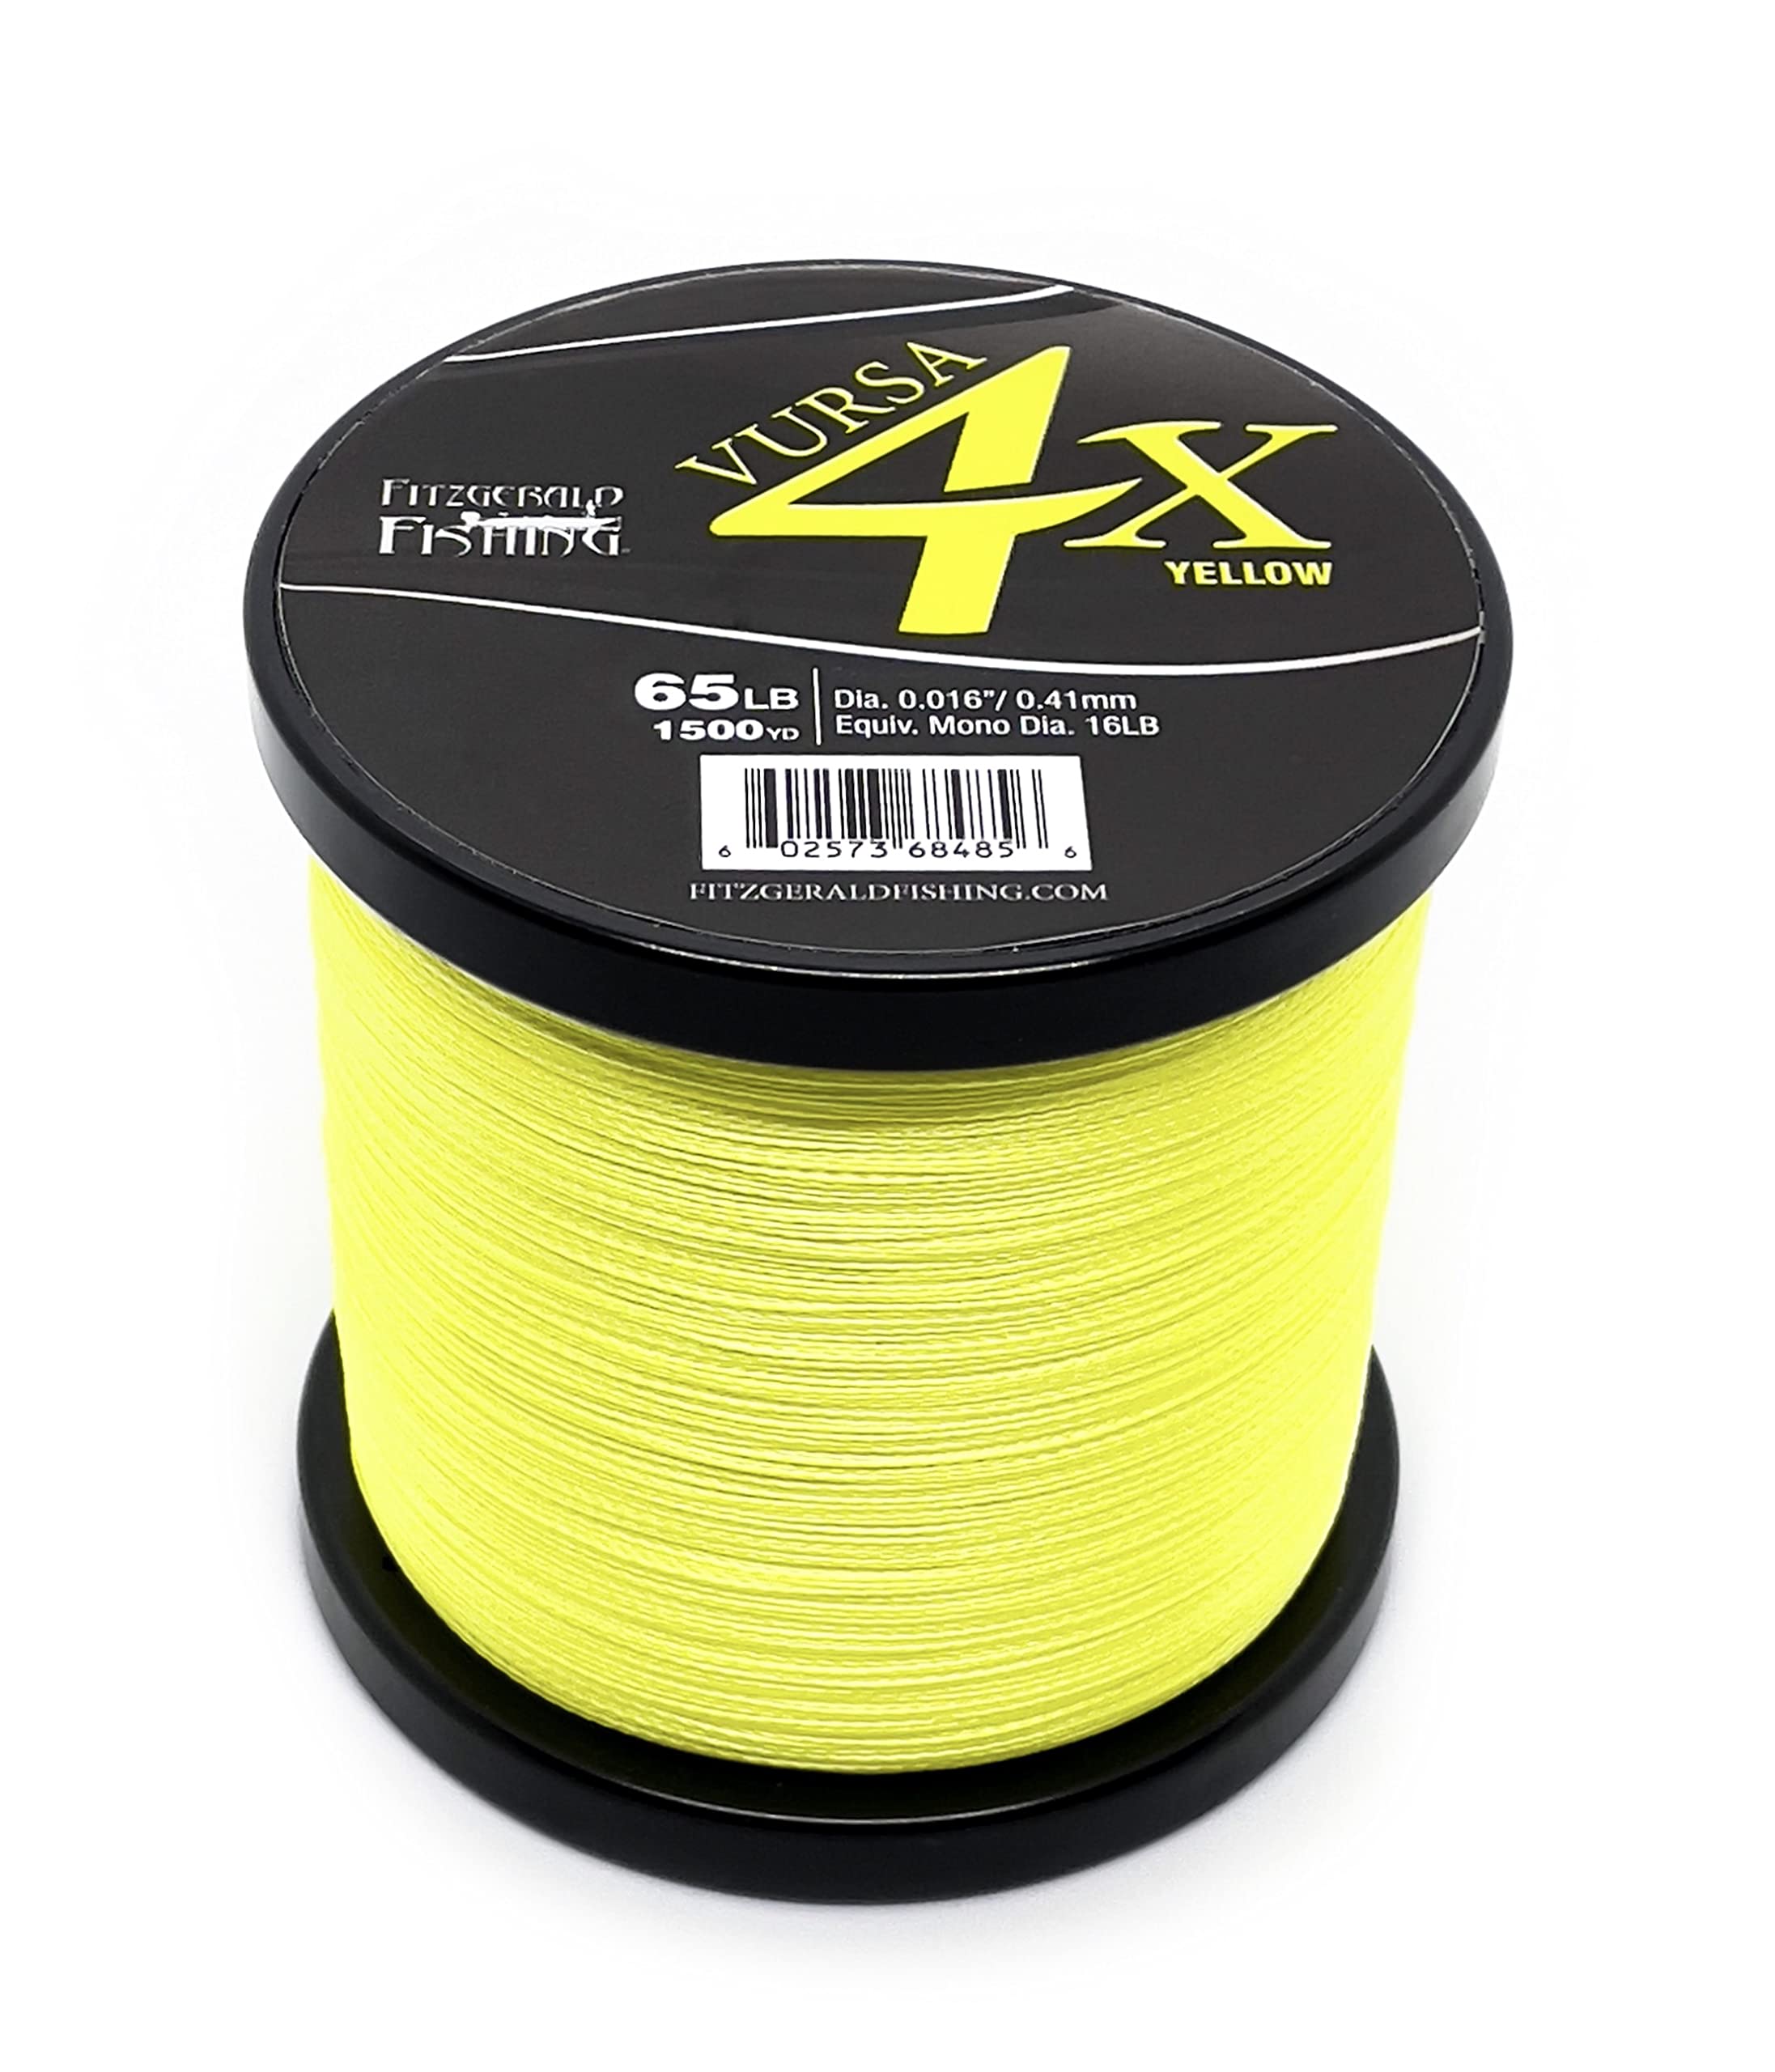 Fitzgerald Vursa 4X Braided Fishing Line - The 4 Strand, Longer Casting,  Fade Resistant Freshwater and Saltwater Fishing Line - Available in Green  and Yellow, 150/300/1500 Yd, 10-120 Lb, Braided Fishing Line